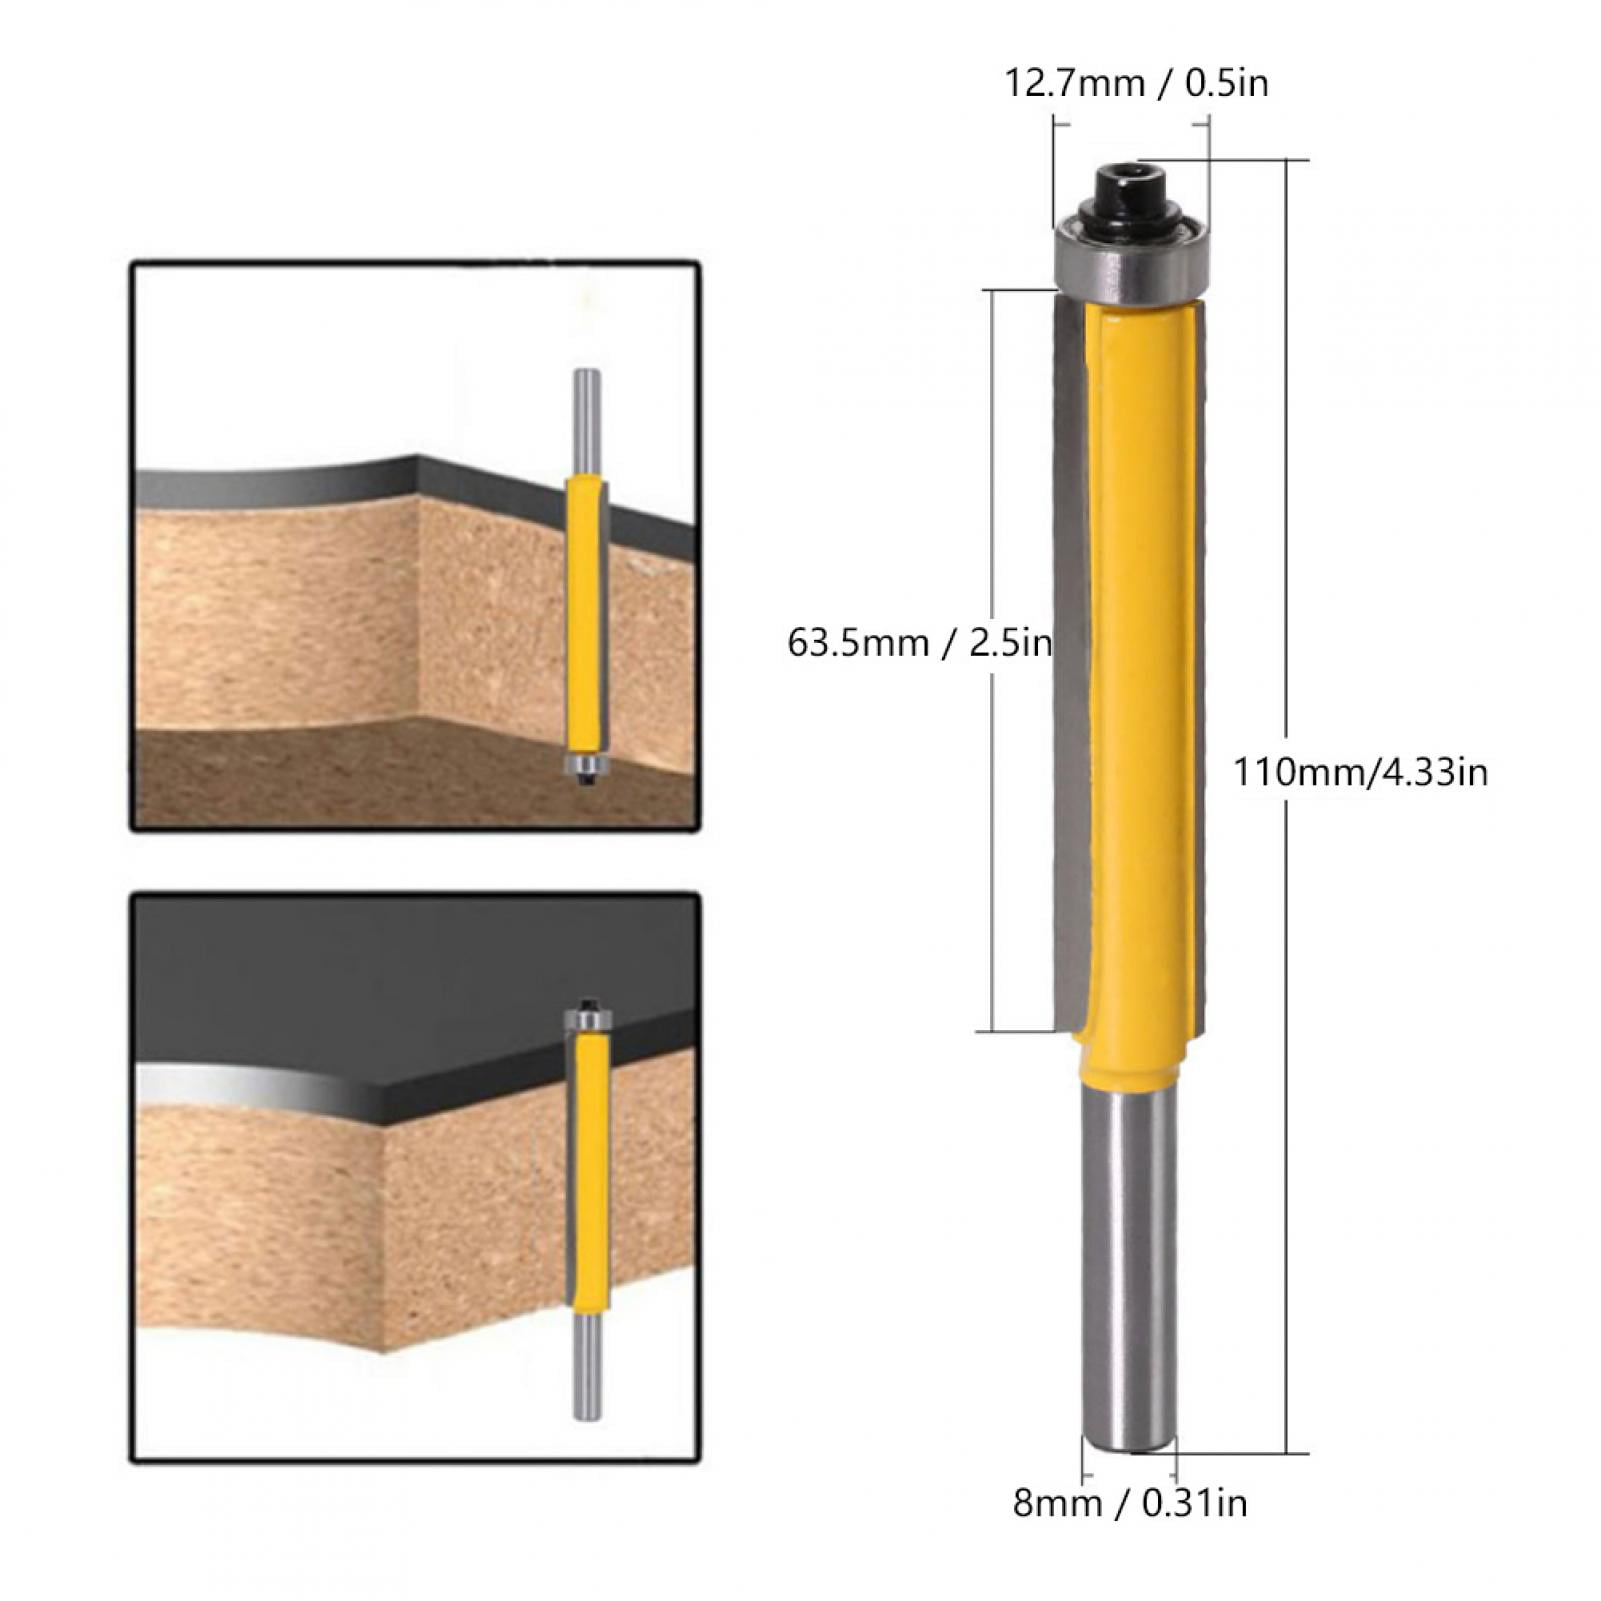 High Accuracy Router Bit Lovely Summer Woodworking Router Bit for Solid Wood Cabinets Cutting Fiberboard 